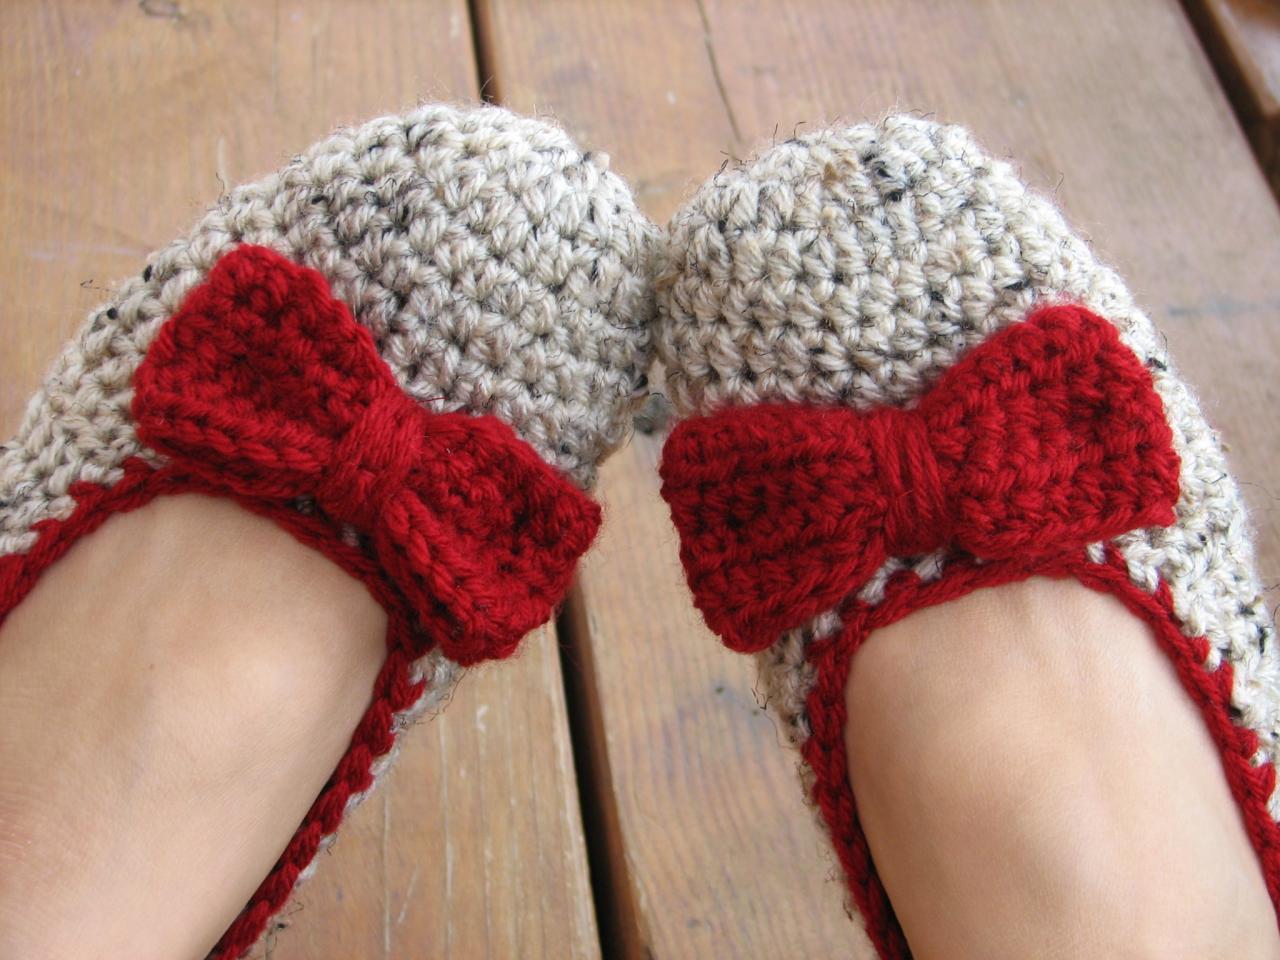 Crochet Women Slippers - Oatmeal With Red Bow, Accessories, Adult Crochet Slippers, Home Shoes, Crochet Women Slippers